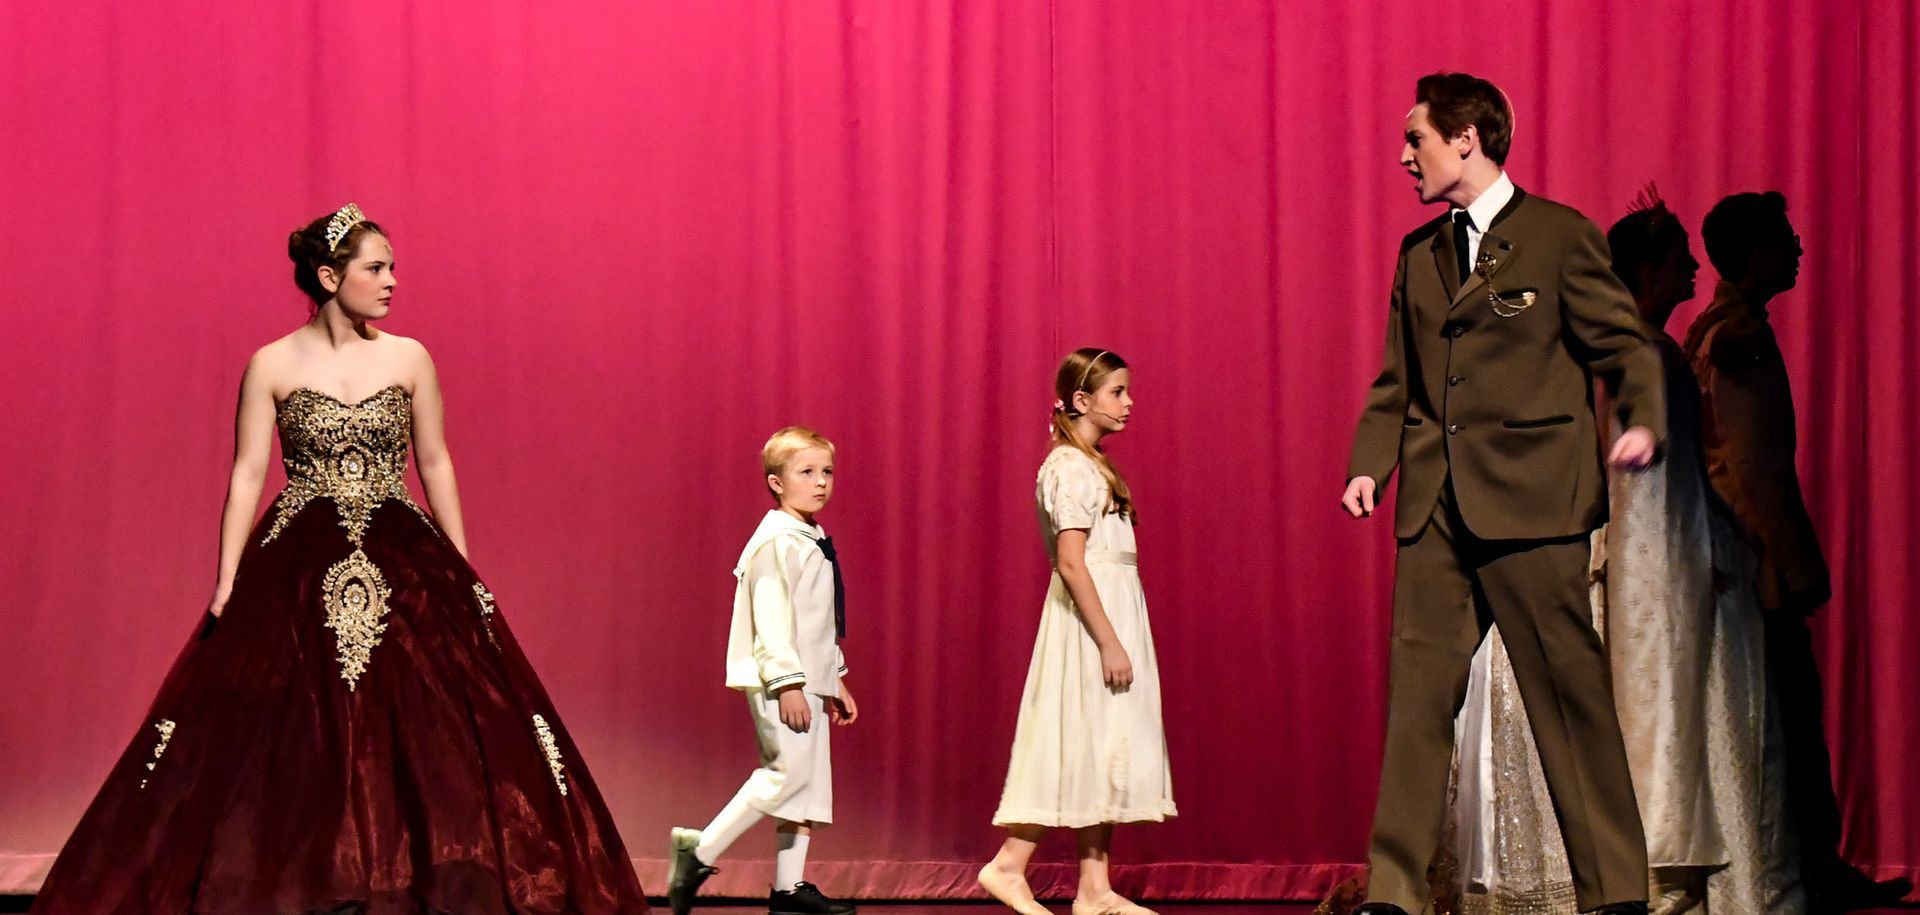 Anastasia on stage with two children and a man